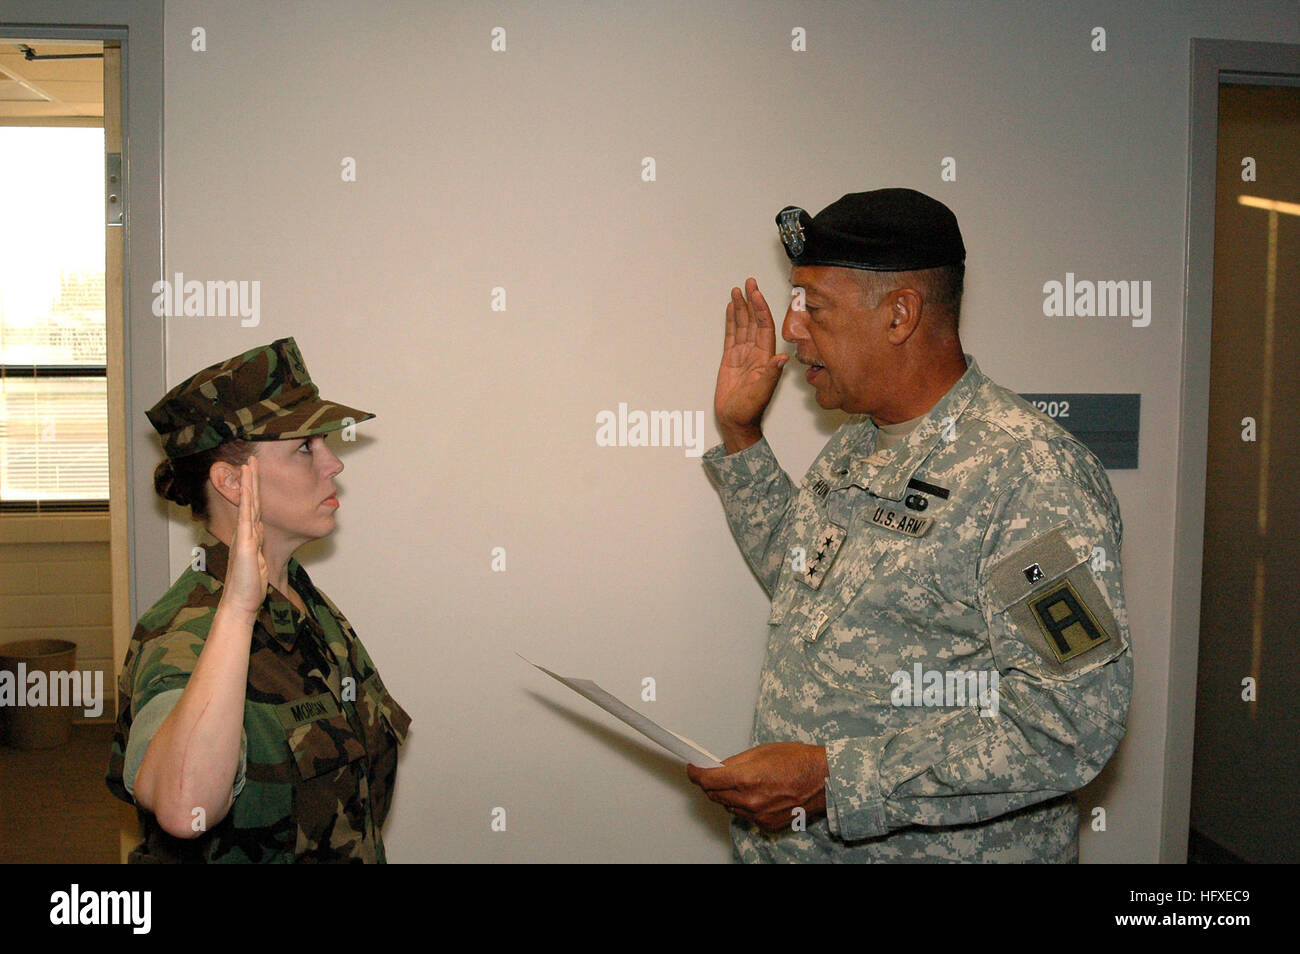 051001-N-3188R-001 Belle Chasse, La. (Oct. 1, 2005) Ð Commanding General, First U.S. Army, Lt. Gen. Russel Honore reenlists U.S. Navy Yeoman 2nd Class Donna Lou Morgan at the Joint Task Force Katrina headquarters in Belle Chasse, La. Lt. Gen. Honore is leading the Hurricane Katrina recovery and relief efforts on the U.S. Gulf Coast. The Navy's involvement in humanitarian assistance operations are led by the Federal Emergency Management Agency (FEMA), in conjunction with the Department of Defense. U.S. Navy photo by Lt. Cmdr. Daniel Rowe (RELEASED) US Navy 051001-N-3188R-001 Commanding General, Stock Photo